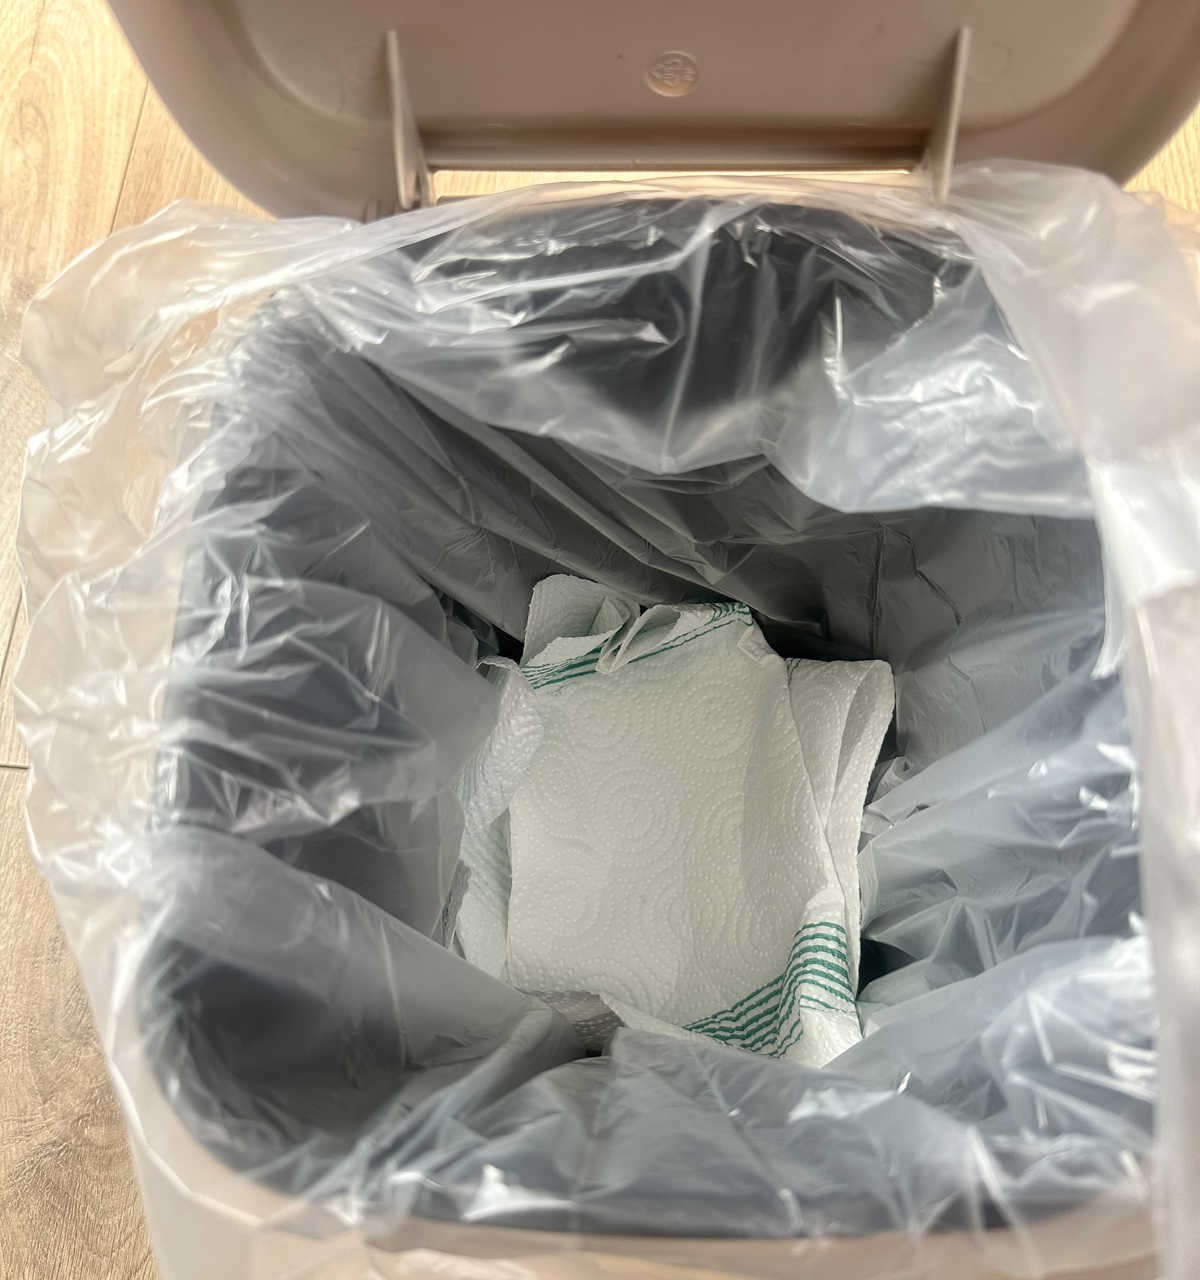 Put Paper Towels at the Bottom of Your Bin to Absorb Food Juices